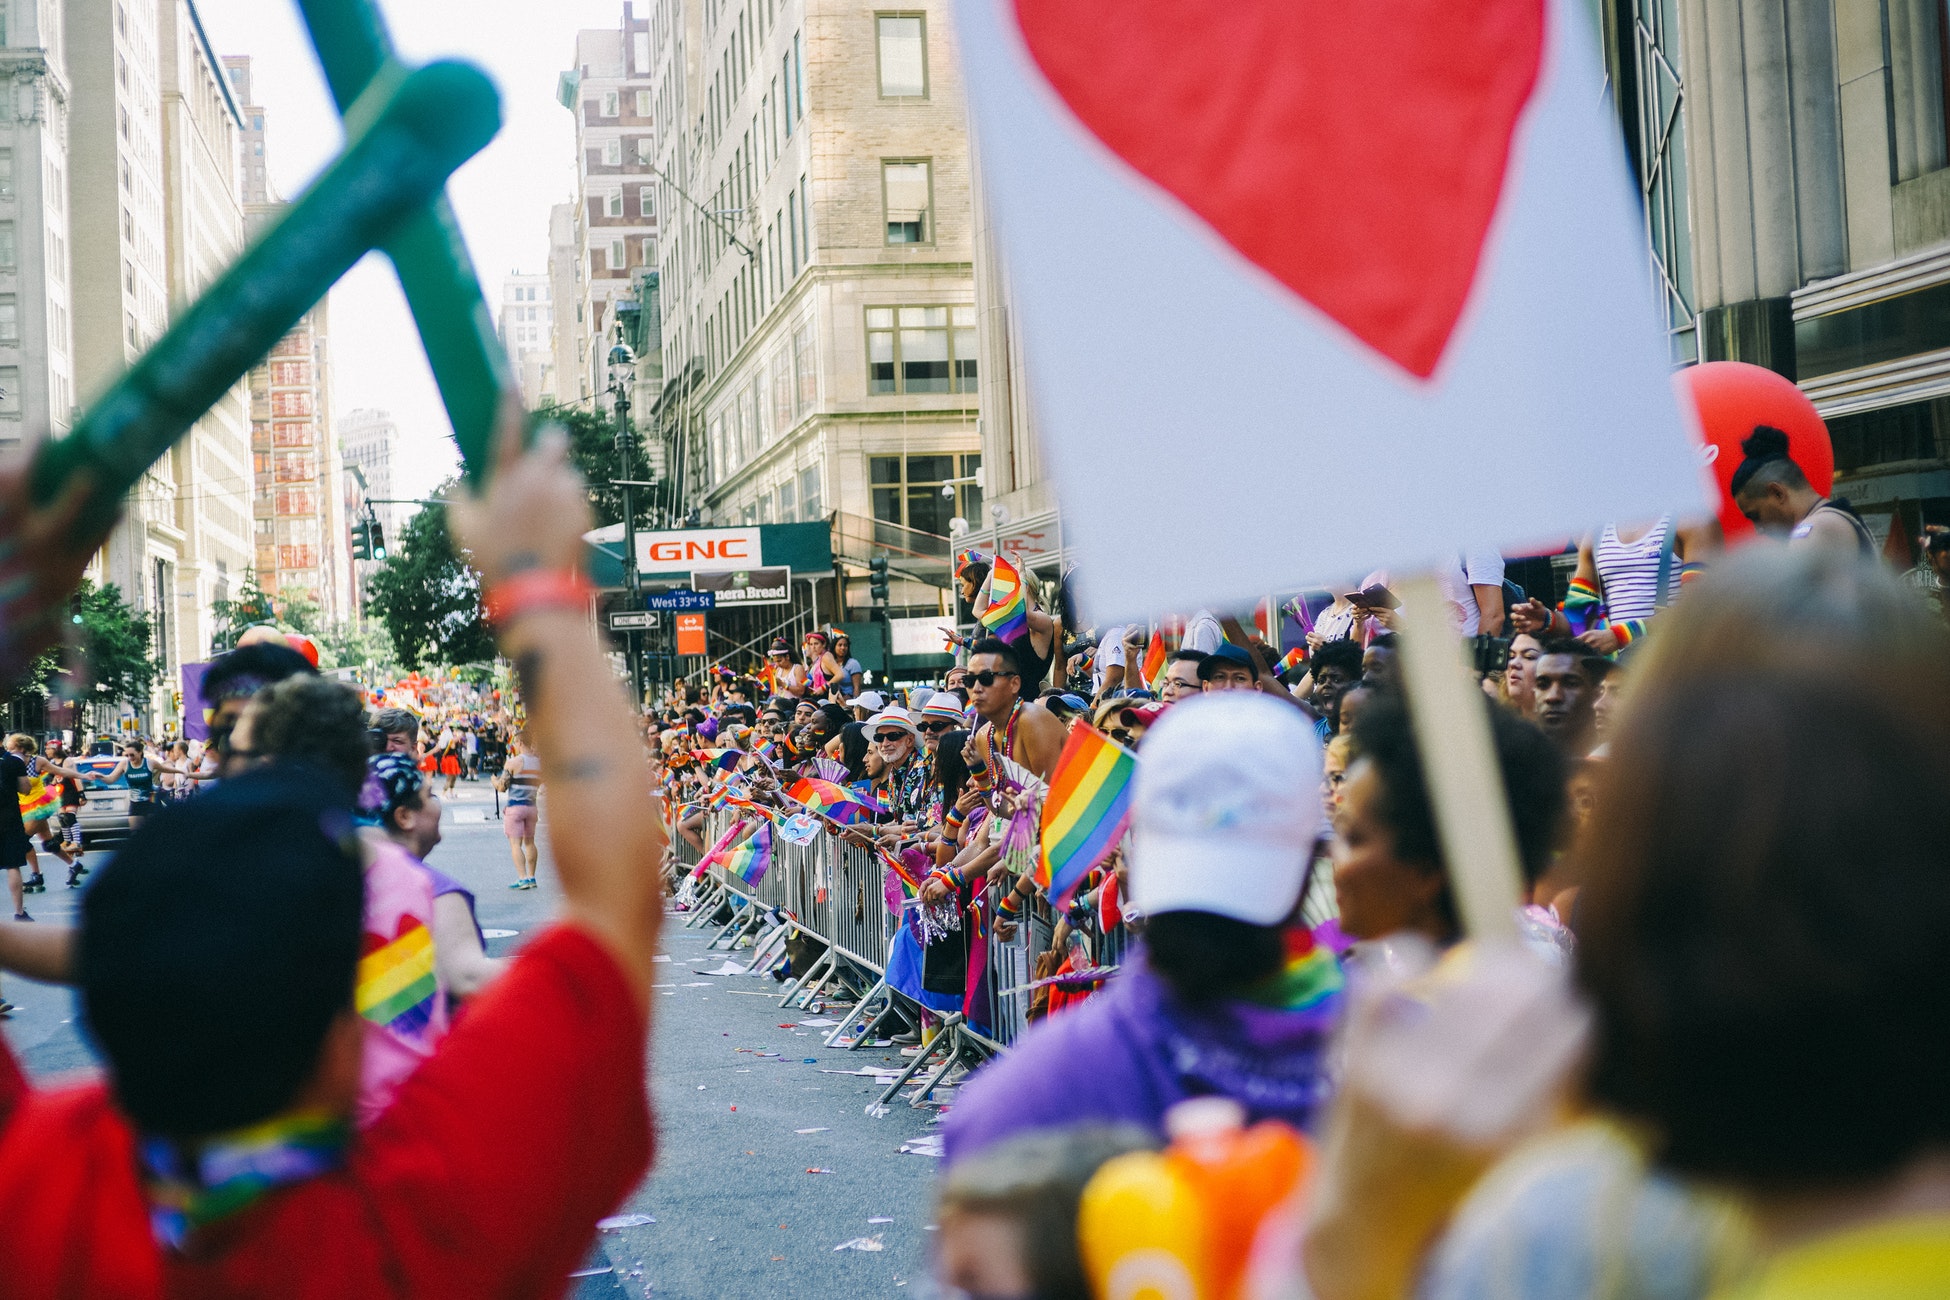 Promote your LGBT hotel for World Pride this summer